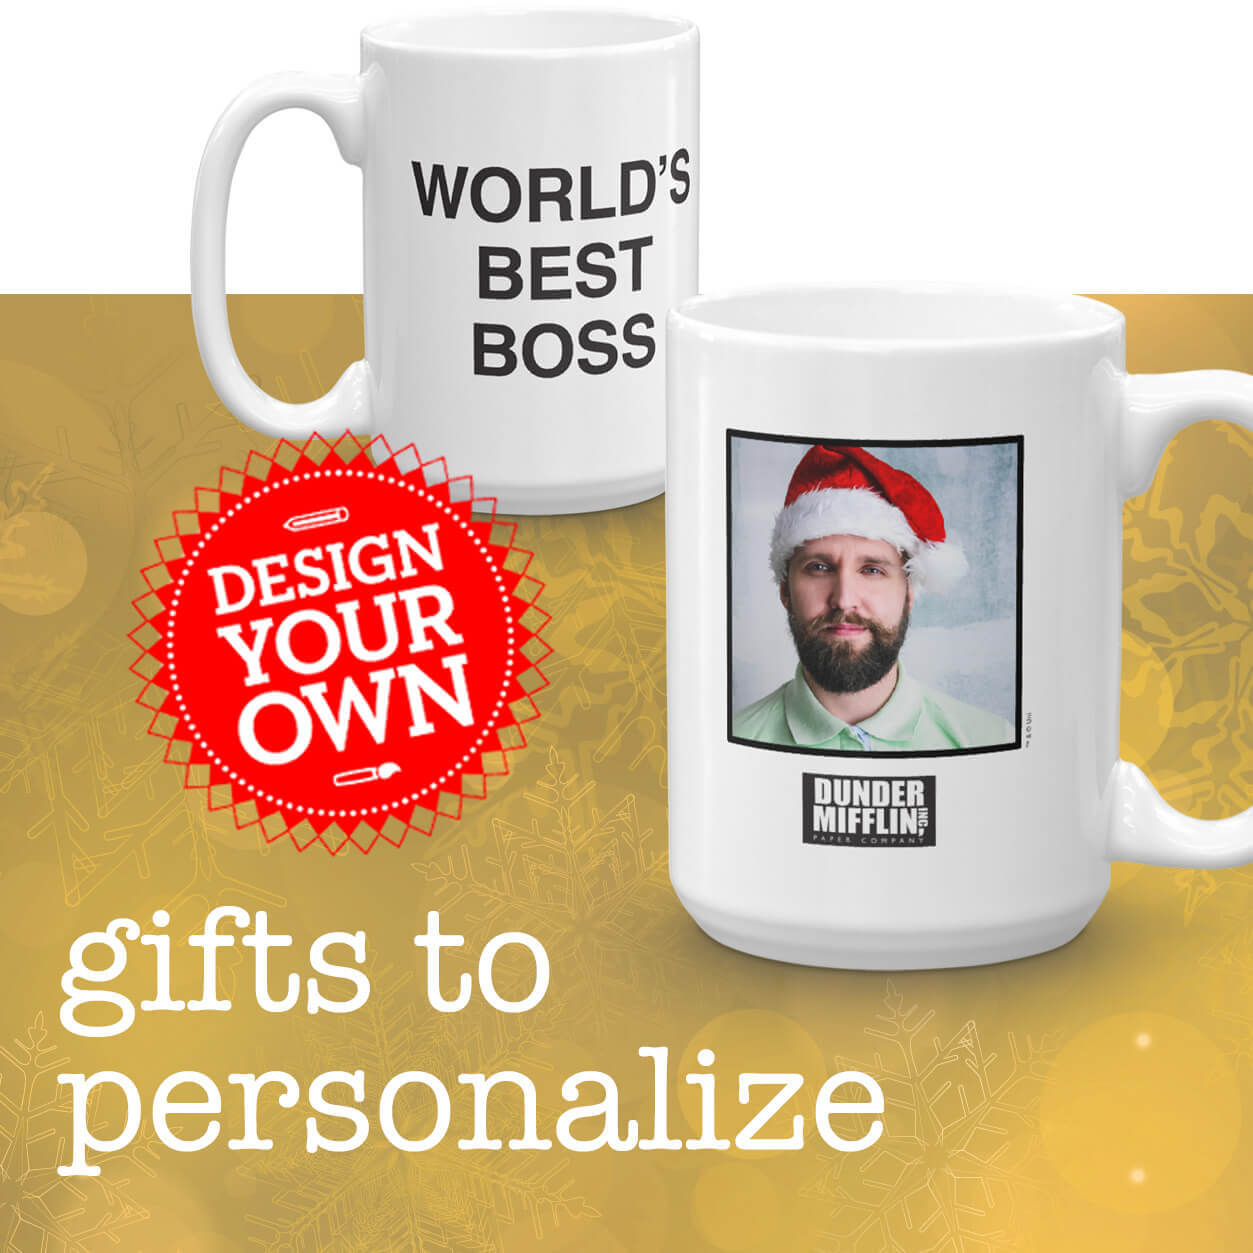 The Office Holiday Gift Guide Personalized Gifts – NBC Store